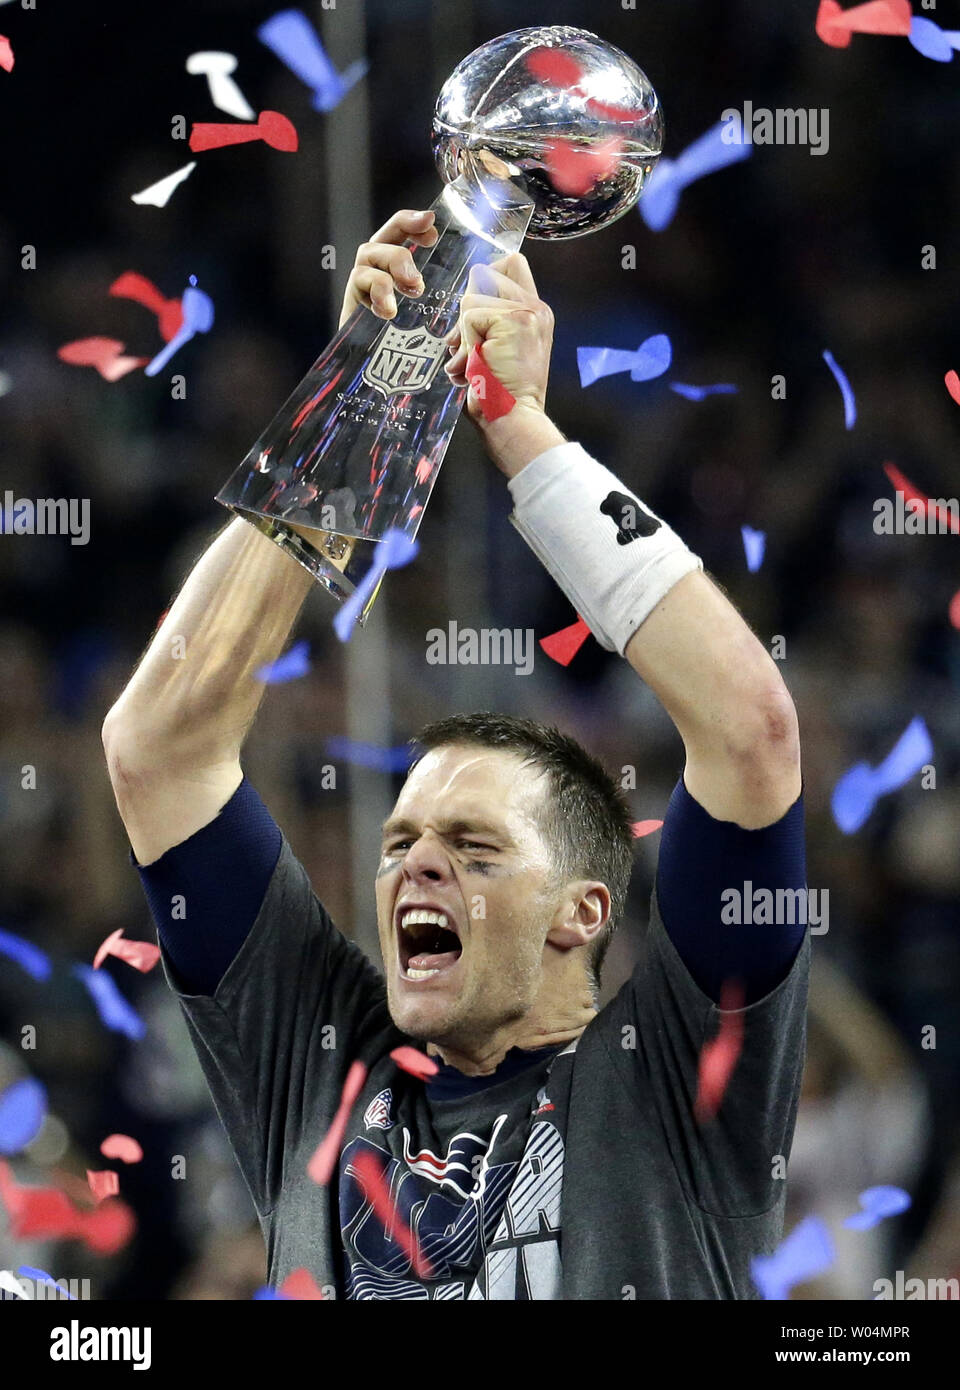 New England Patriots quarterback Tom Brady (12) hoists the Vince Lombardi  trophy after the Patriots defeated the Atlanta Falcons 34-28 in overtime of Super  Bowl LI at NRG Stadium in Houston Texas